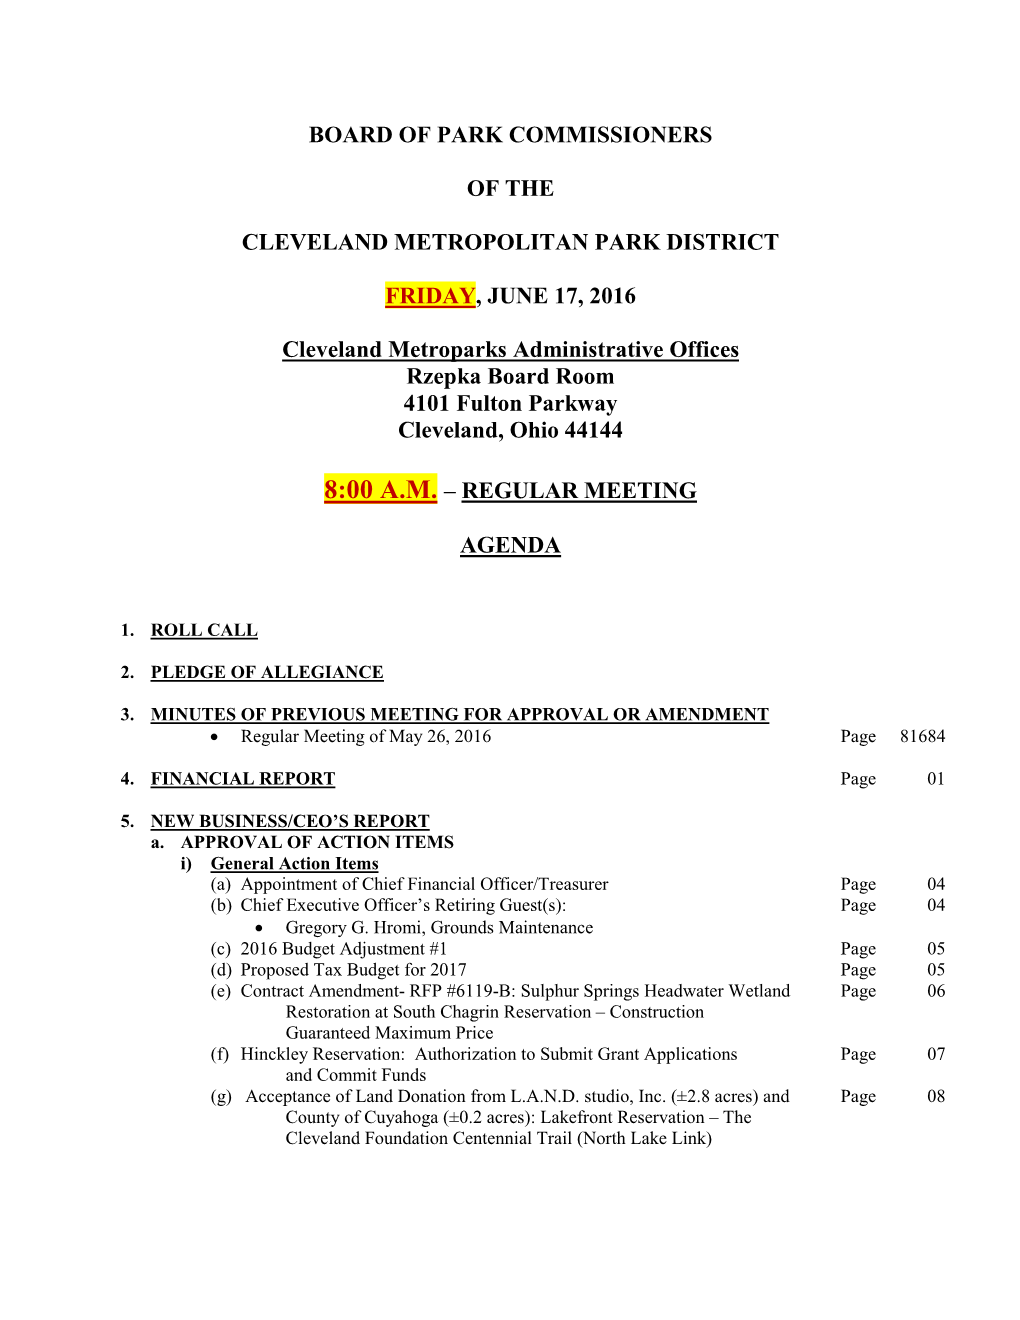 Board of Park Commissioners of the Cleveland Metropolitan Park District